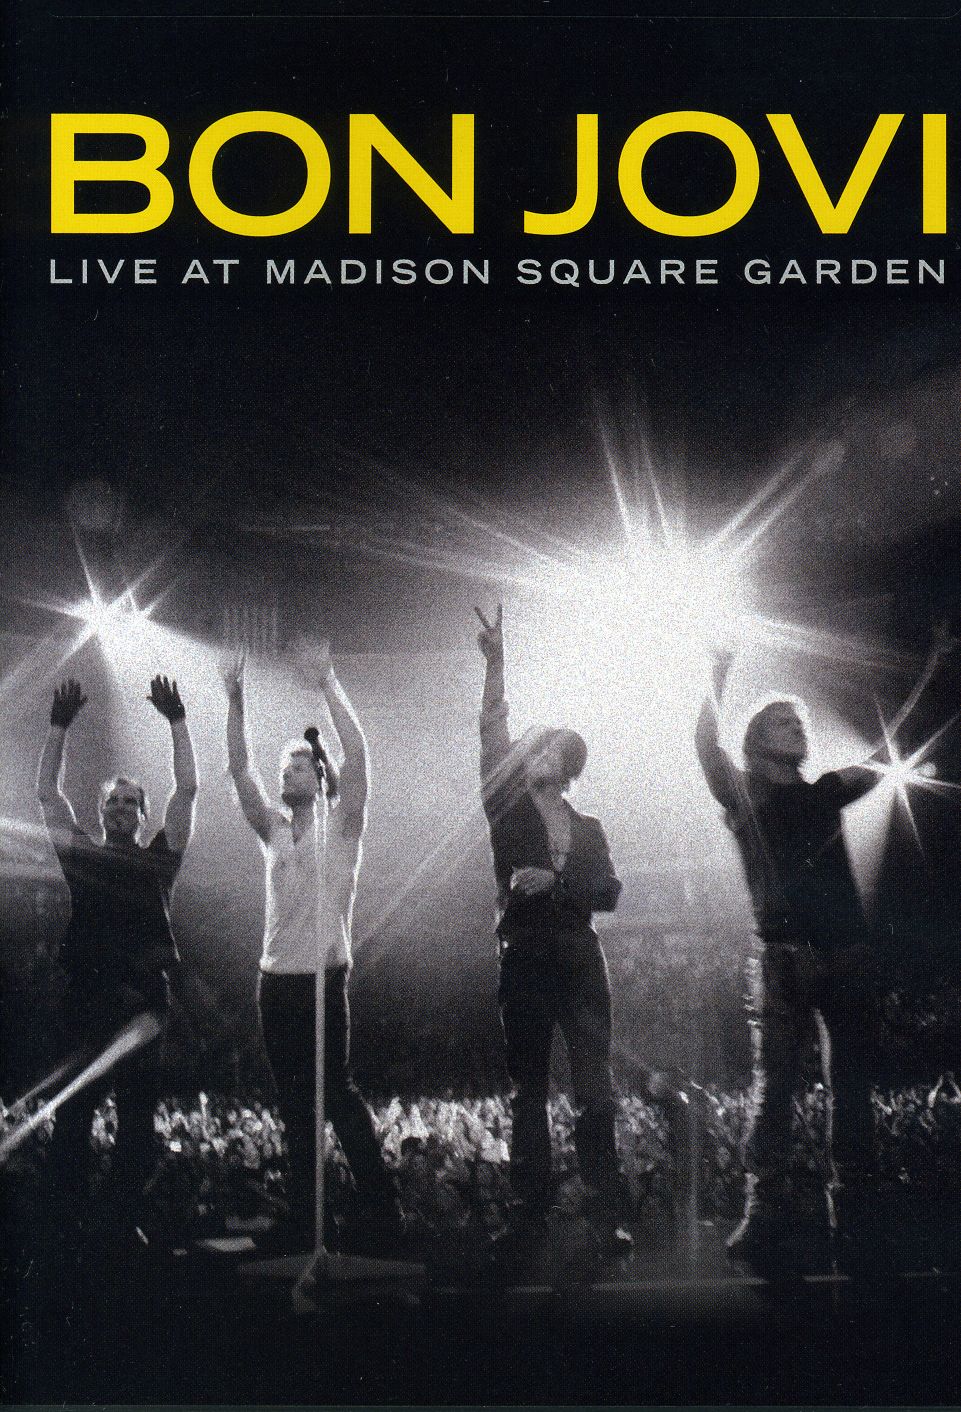 LIVE AT MADISON SQUARE GARDEN